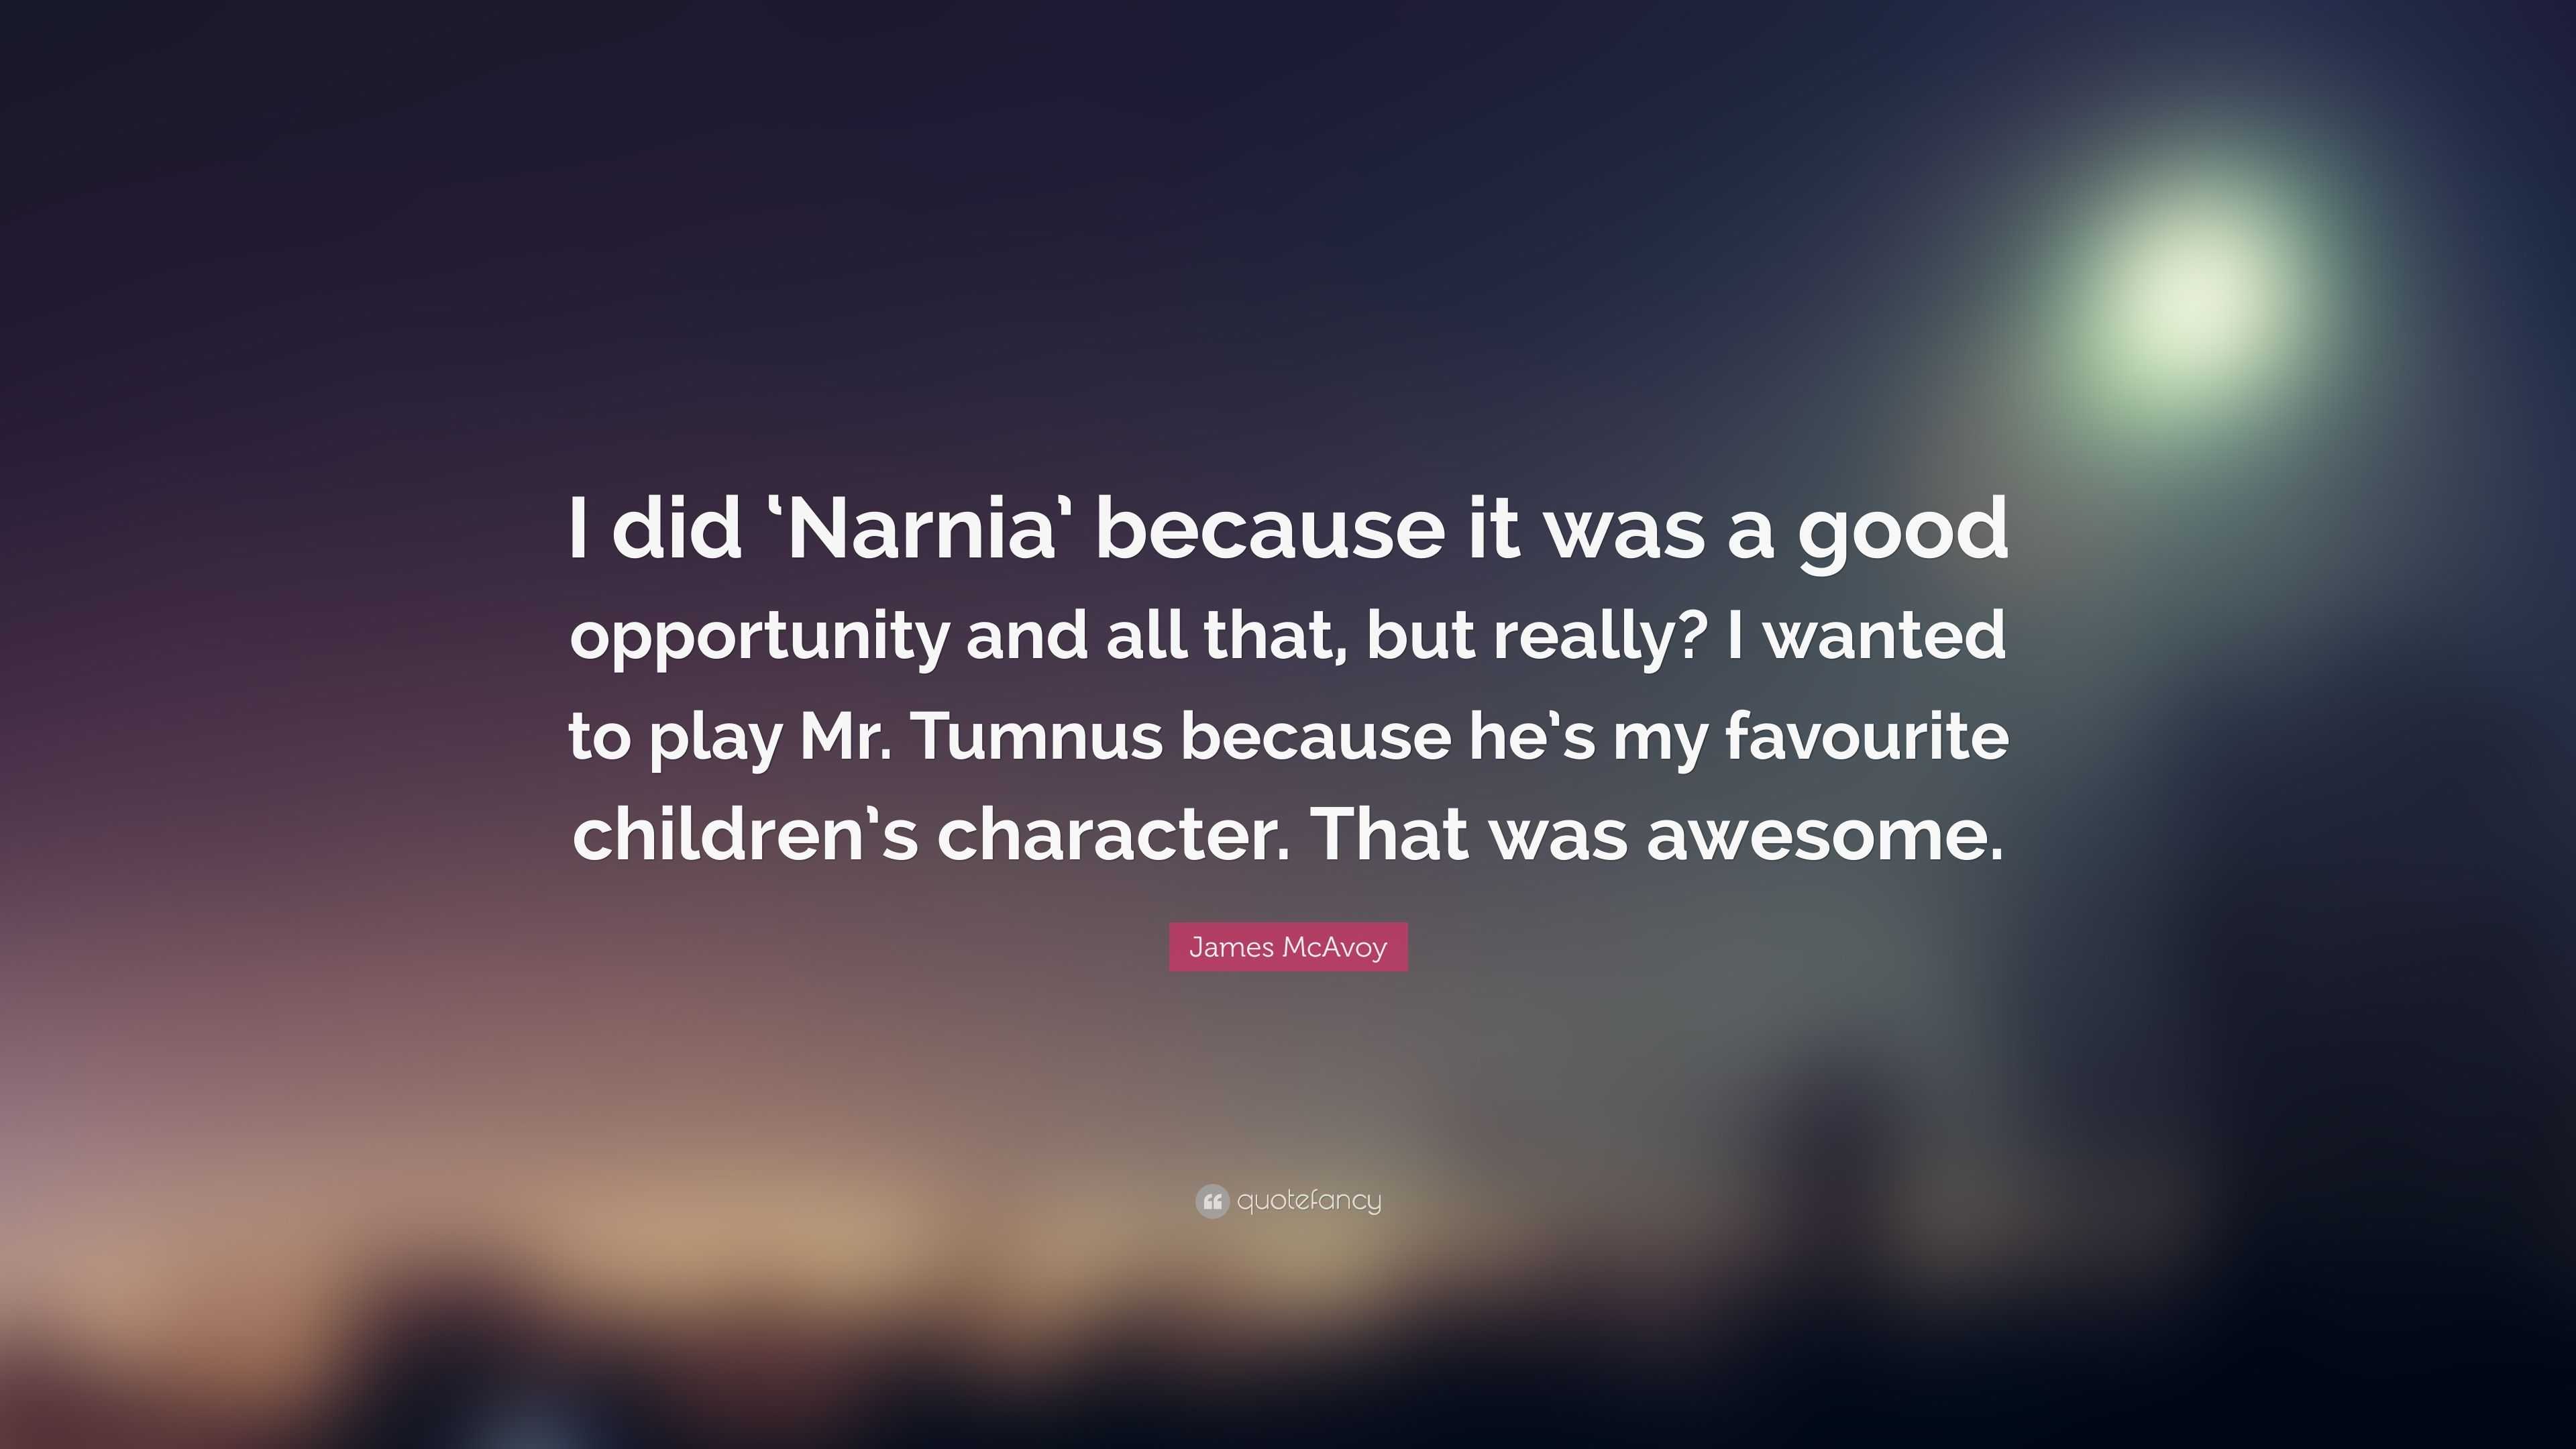 James Mcavoy Quote I Did Narnia Because It Was A Good Opportunity And All That But Really I Wanted To Play Mr Tumnus Because He S My F